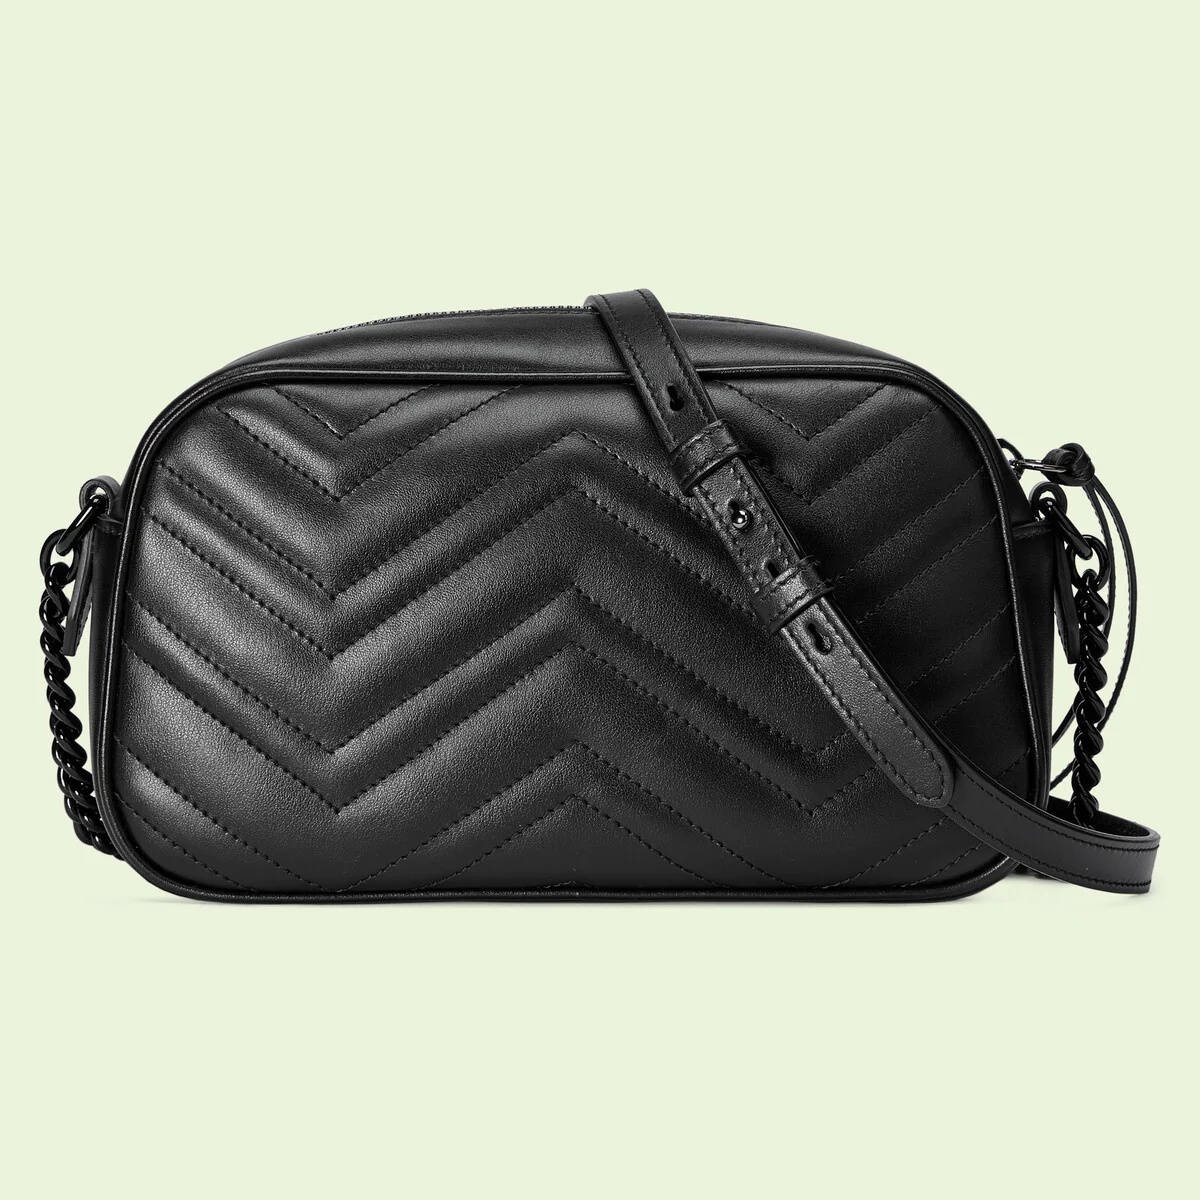 GG Marmont small shoulder bag - 7